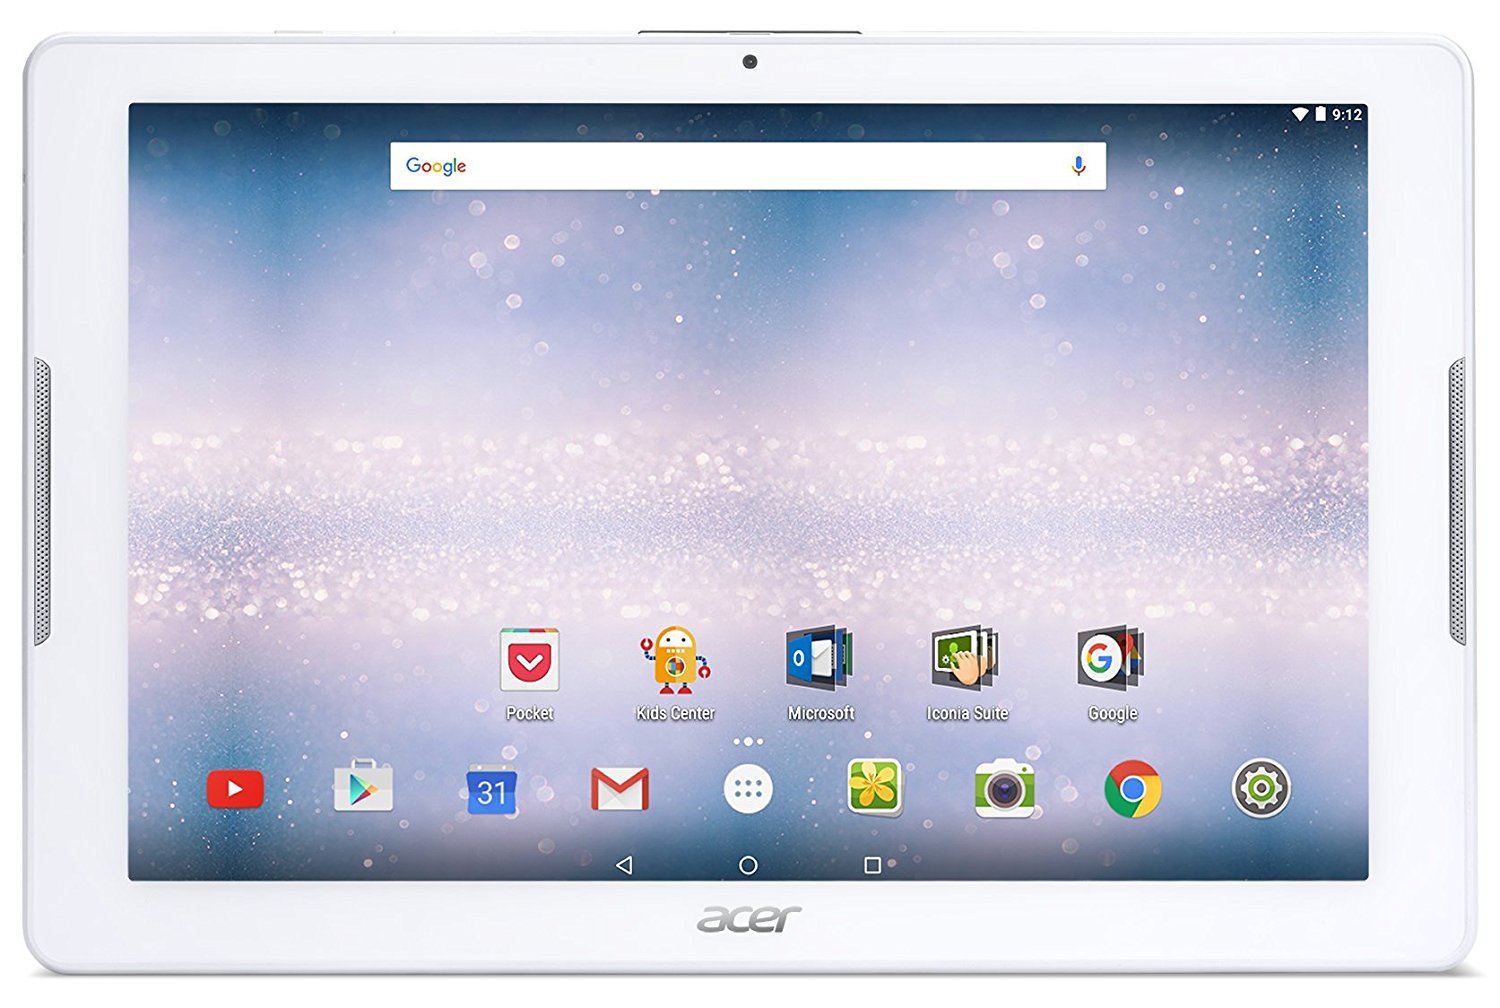 Acer Iconia One 10 B3-A30